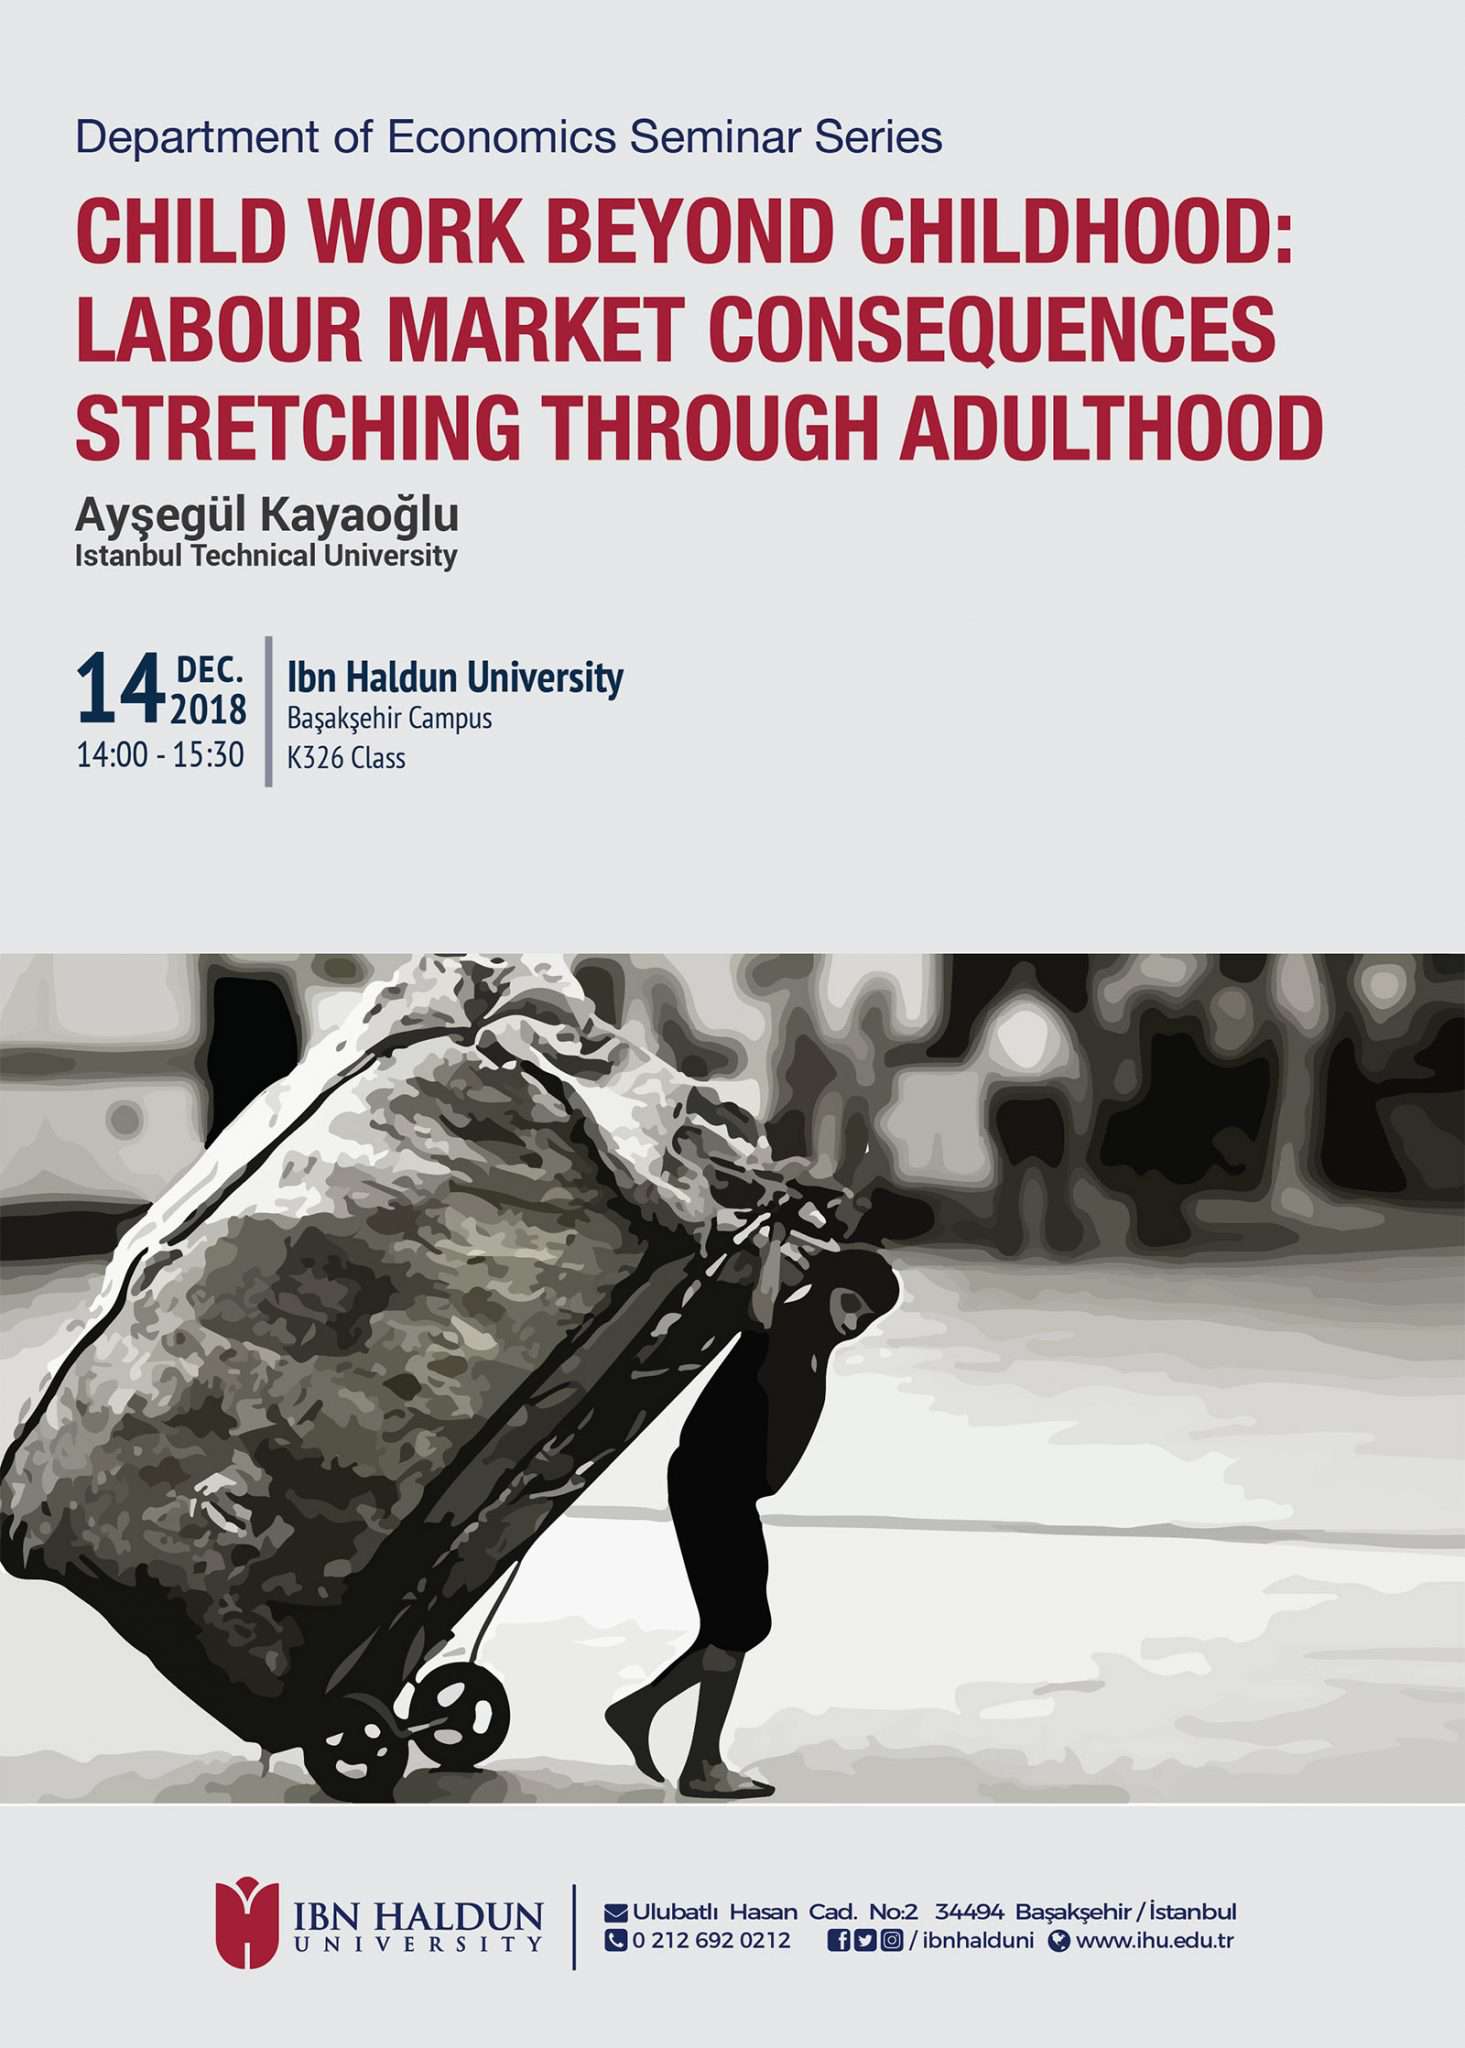 Child Work Beyond Childhood: Labour Market Consequences Stretching Through Adulthood